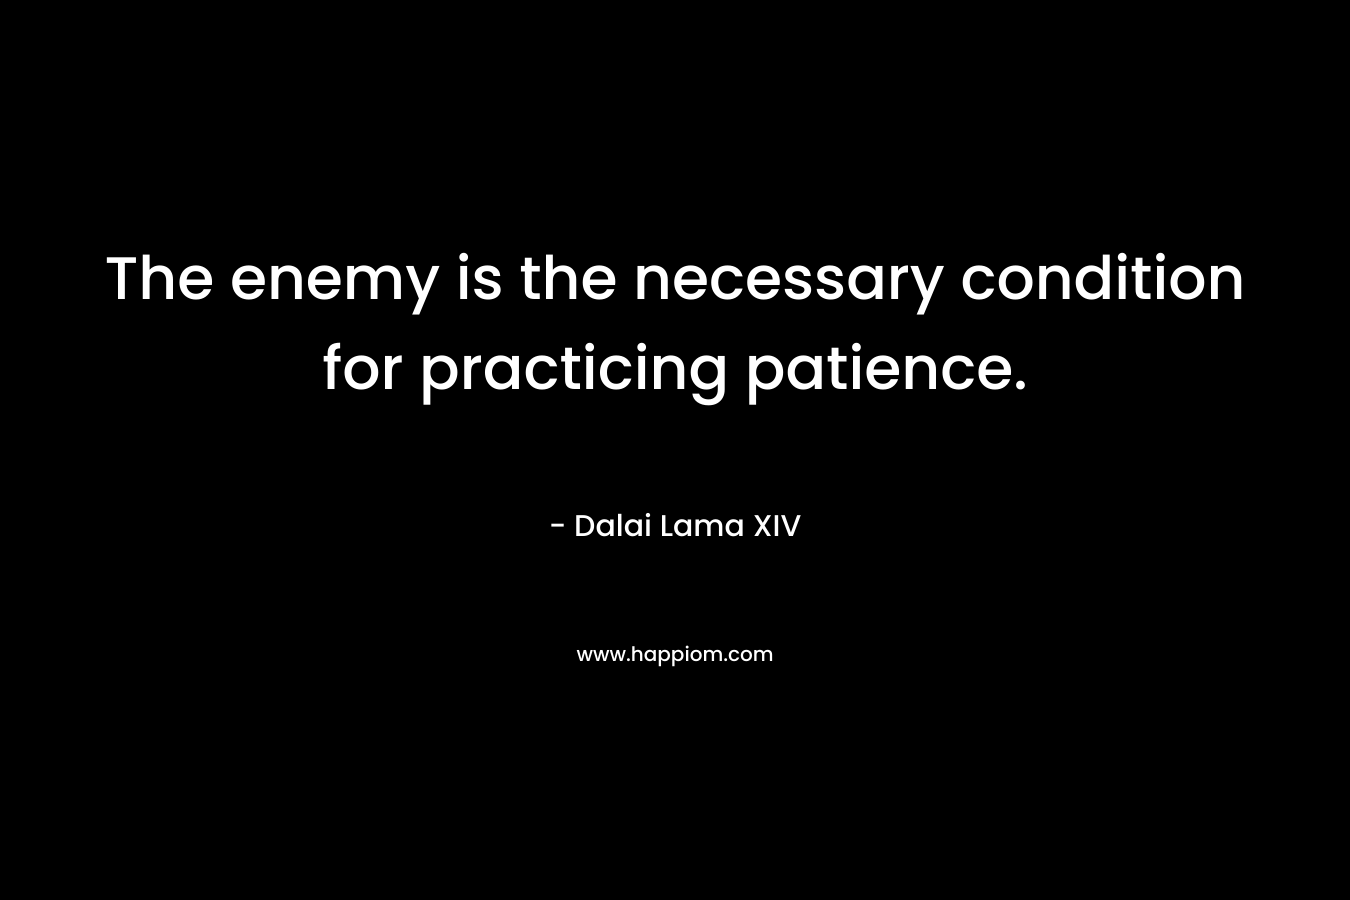 The enemy is the necessary condition for practicing patience.